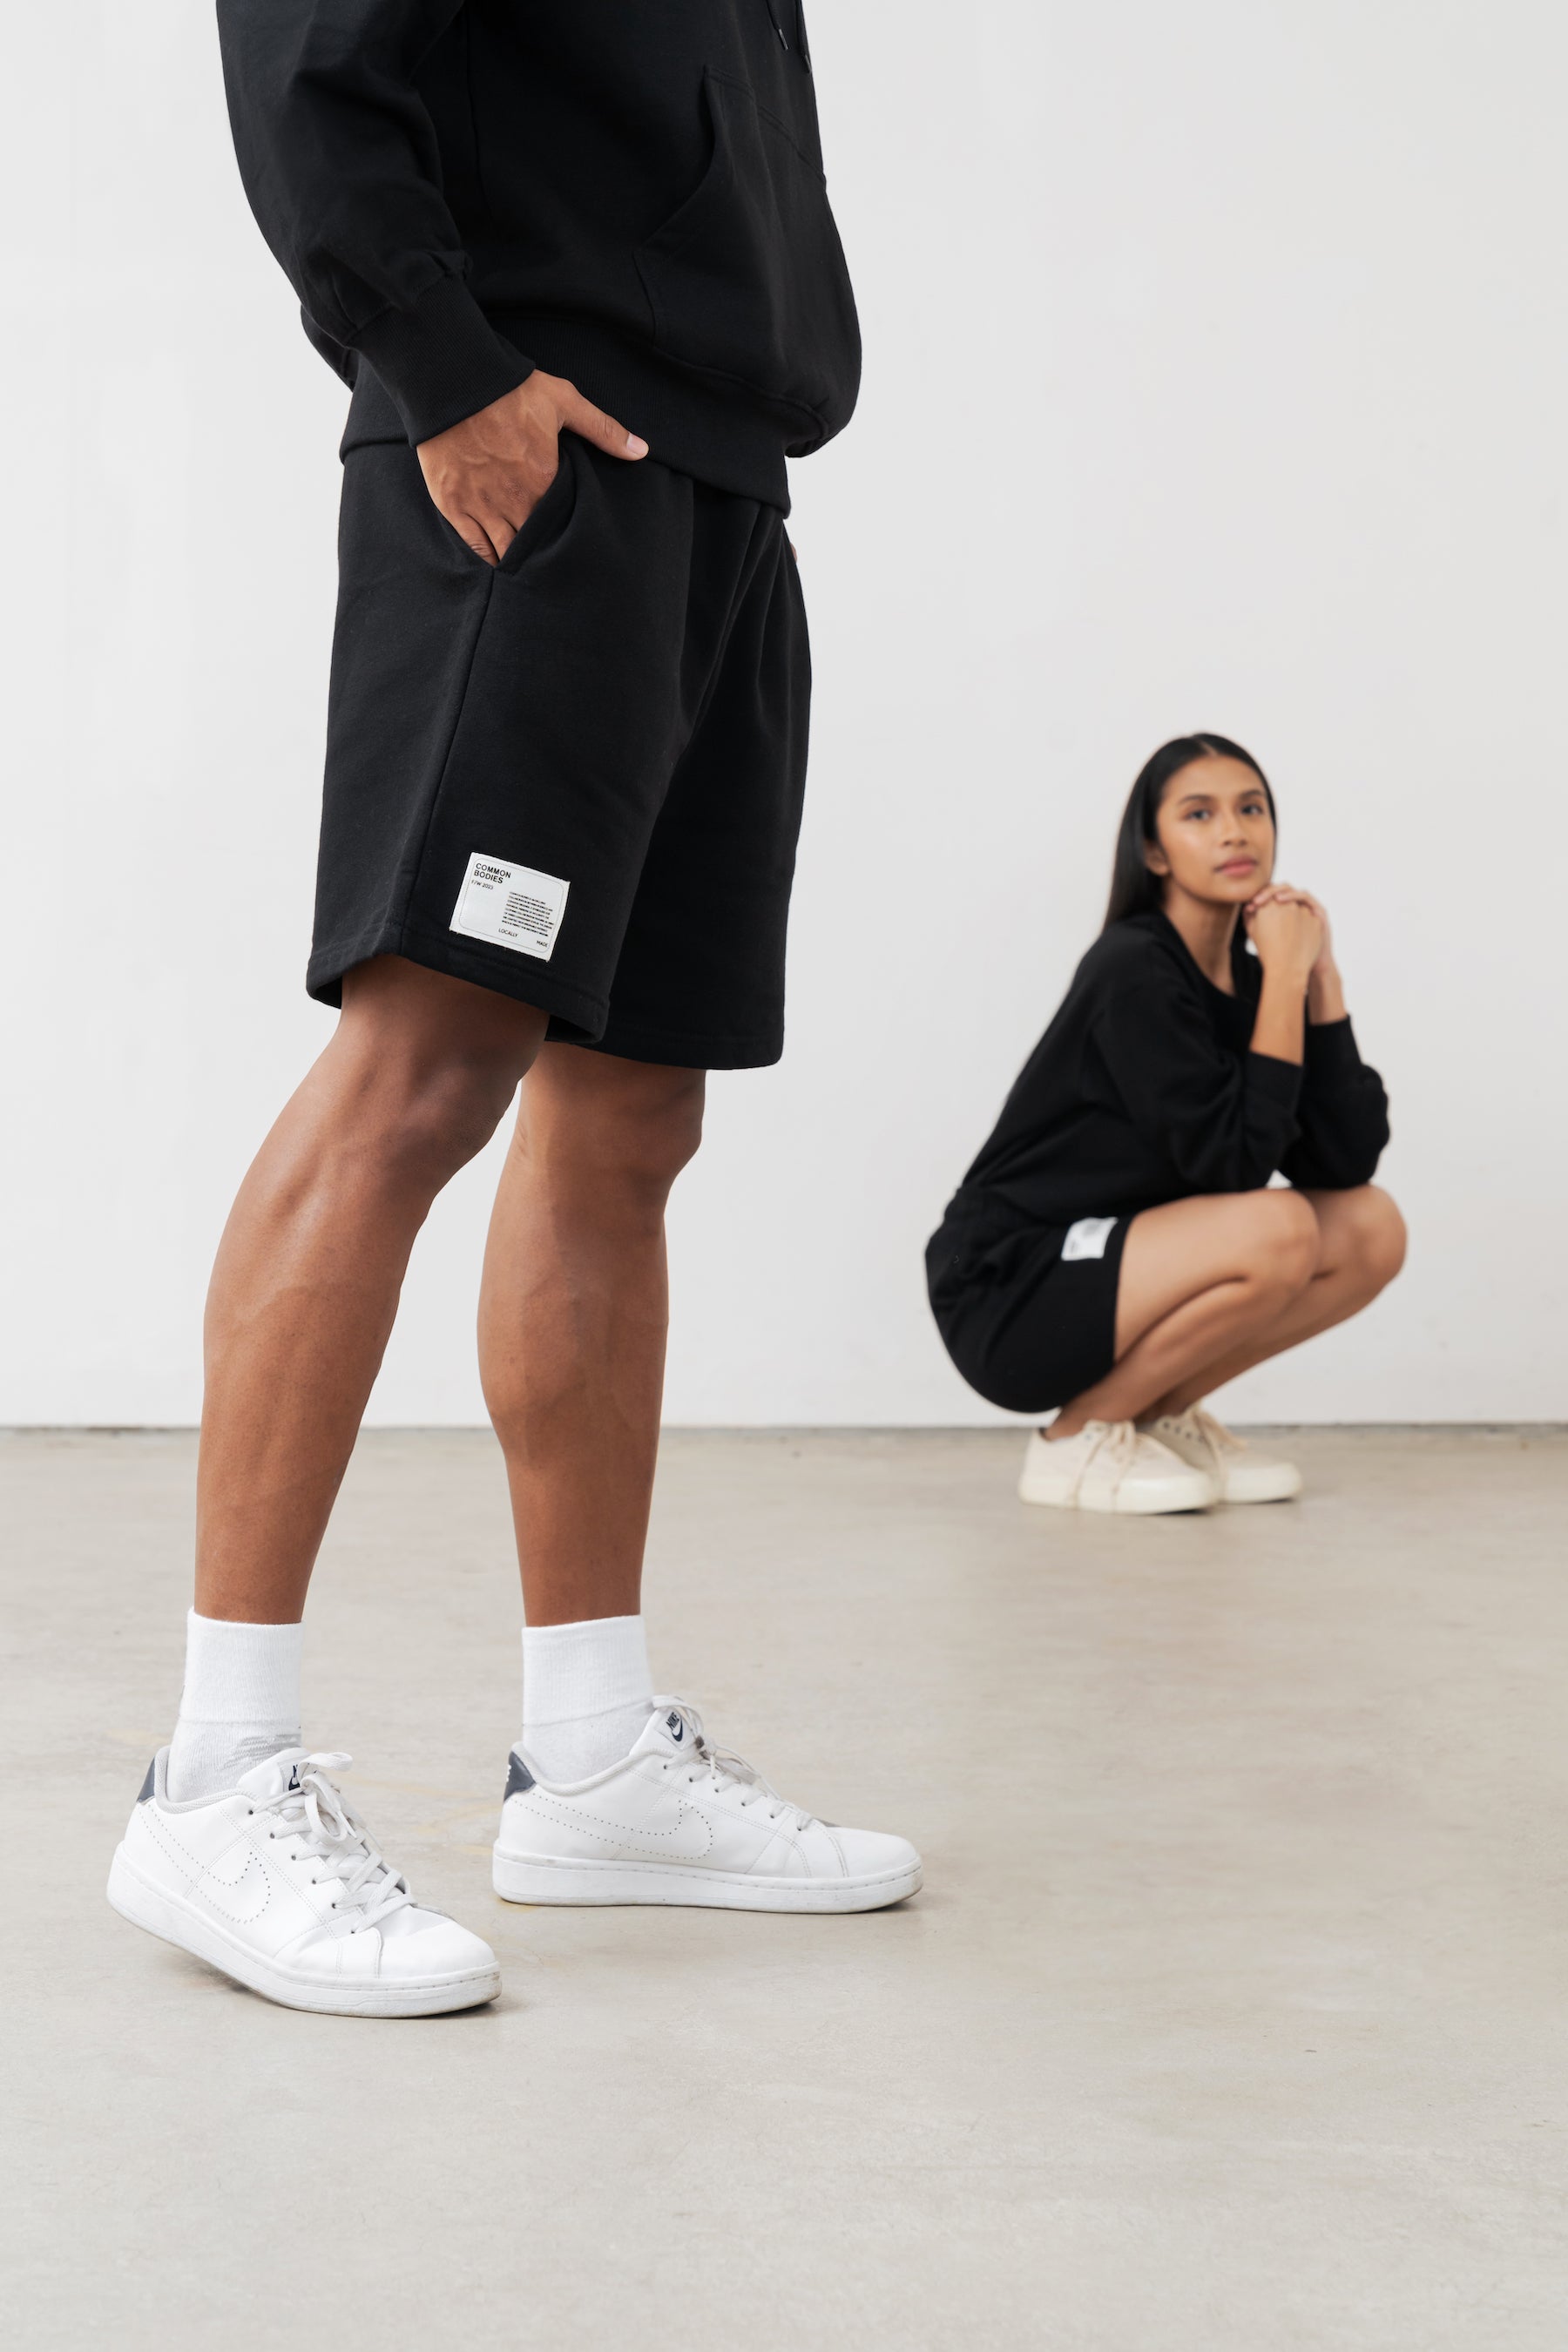 Frequency Shorts in Black (Unisex)